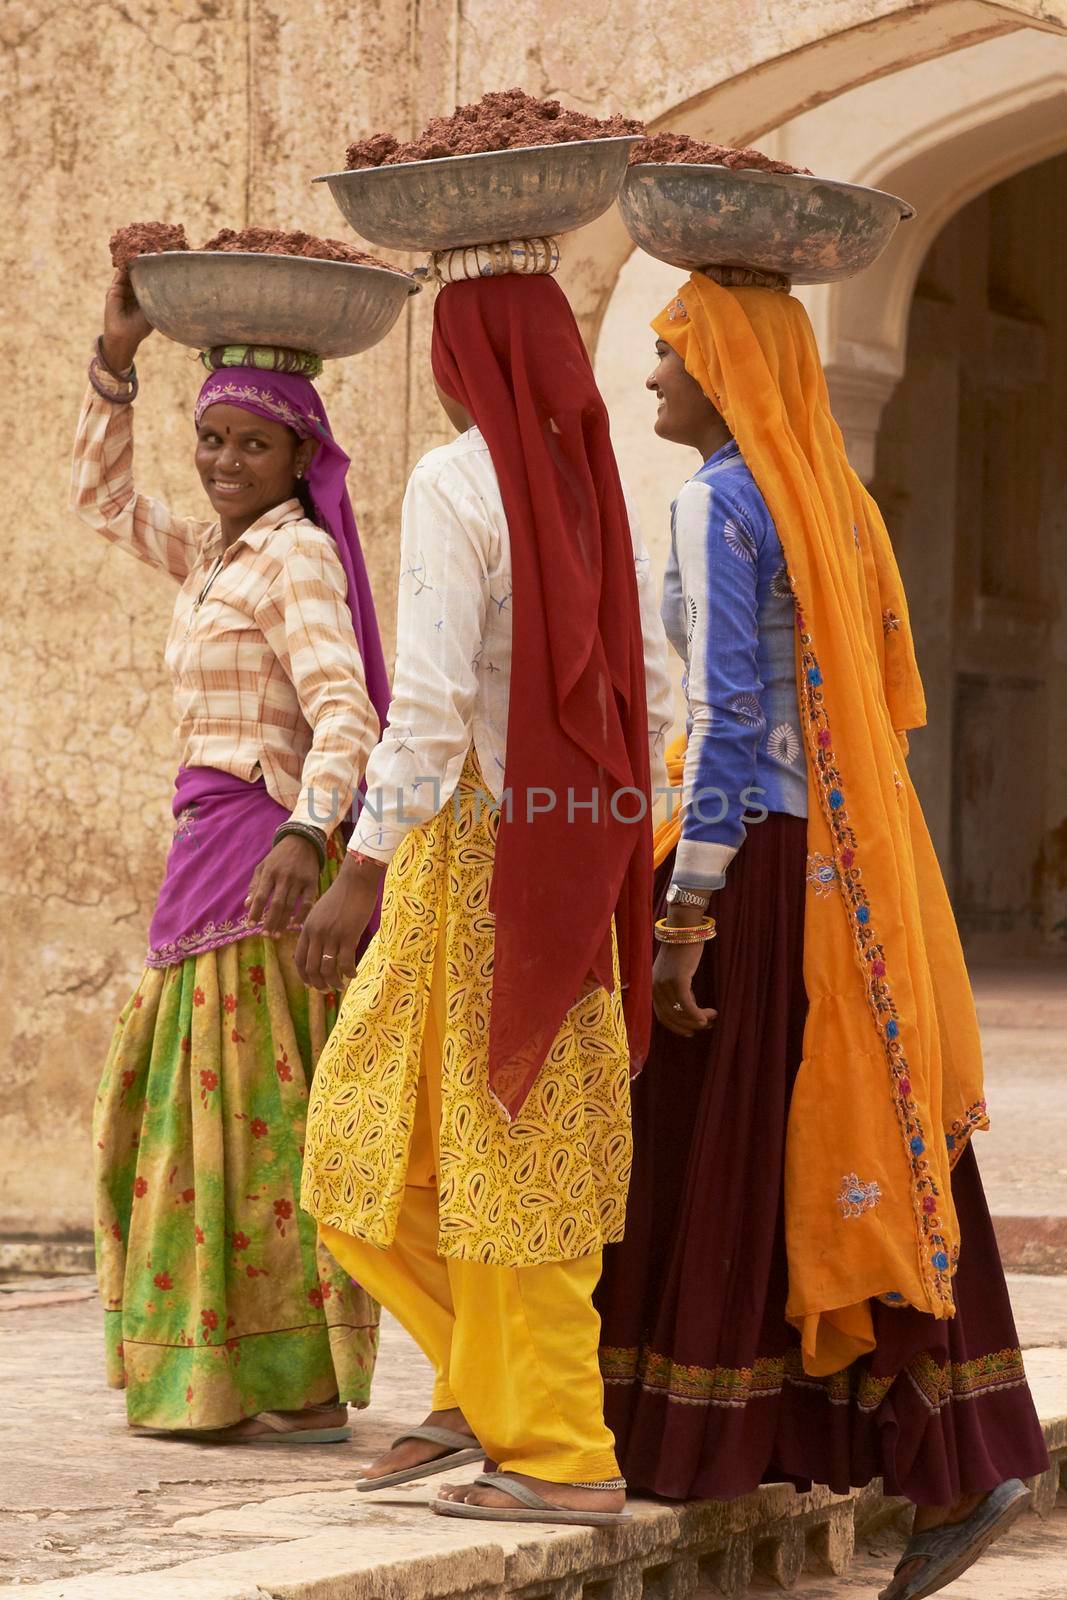 JAIPUR, RAJASTHAN, INDIA - JULY 30, 2008: Female laborers transporting water and plaster in bowls carried on the head during the restoration of a palace inside Amber Fort in Jaipur, Rajasthan, India.